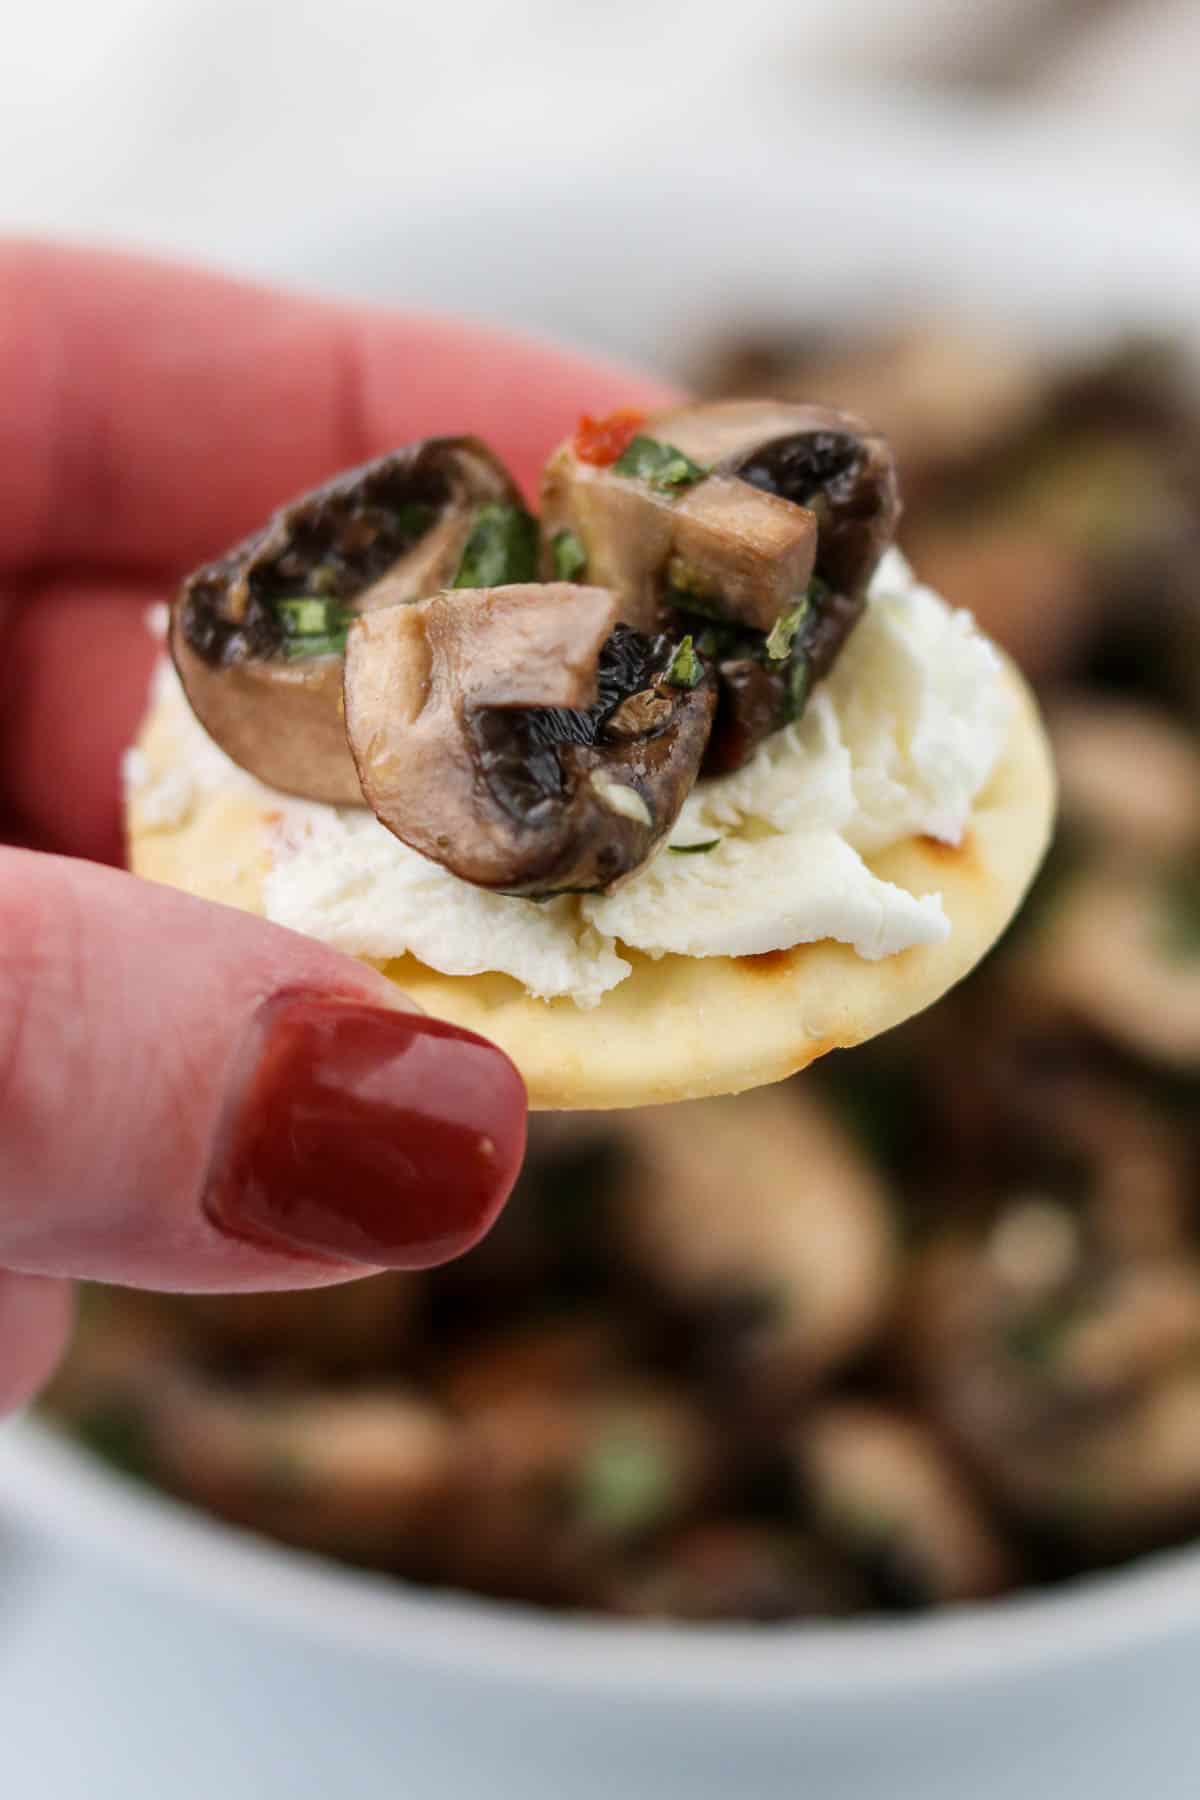 Goat cheese and Quick Pickled Mushrooms on a cracker.